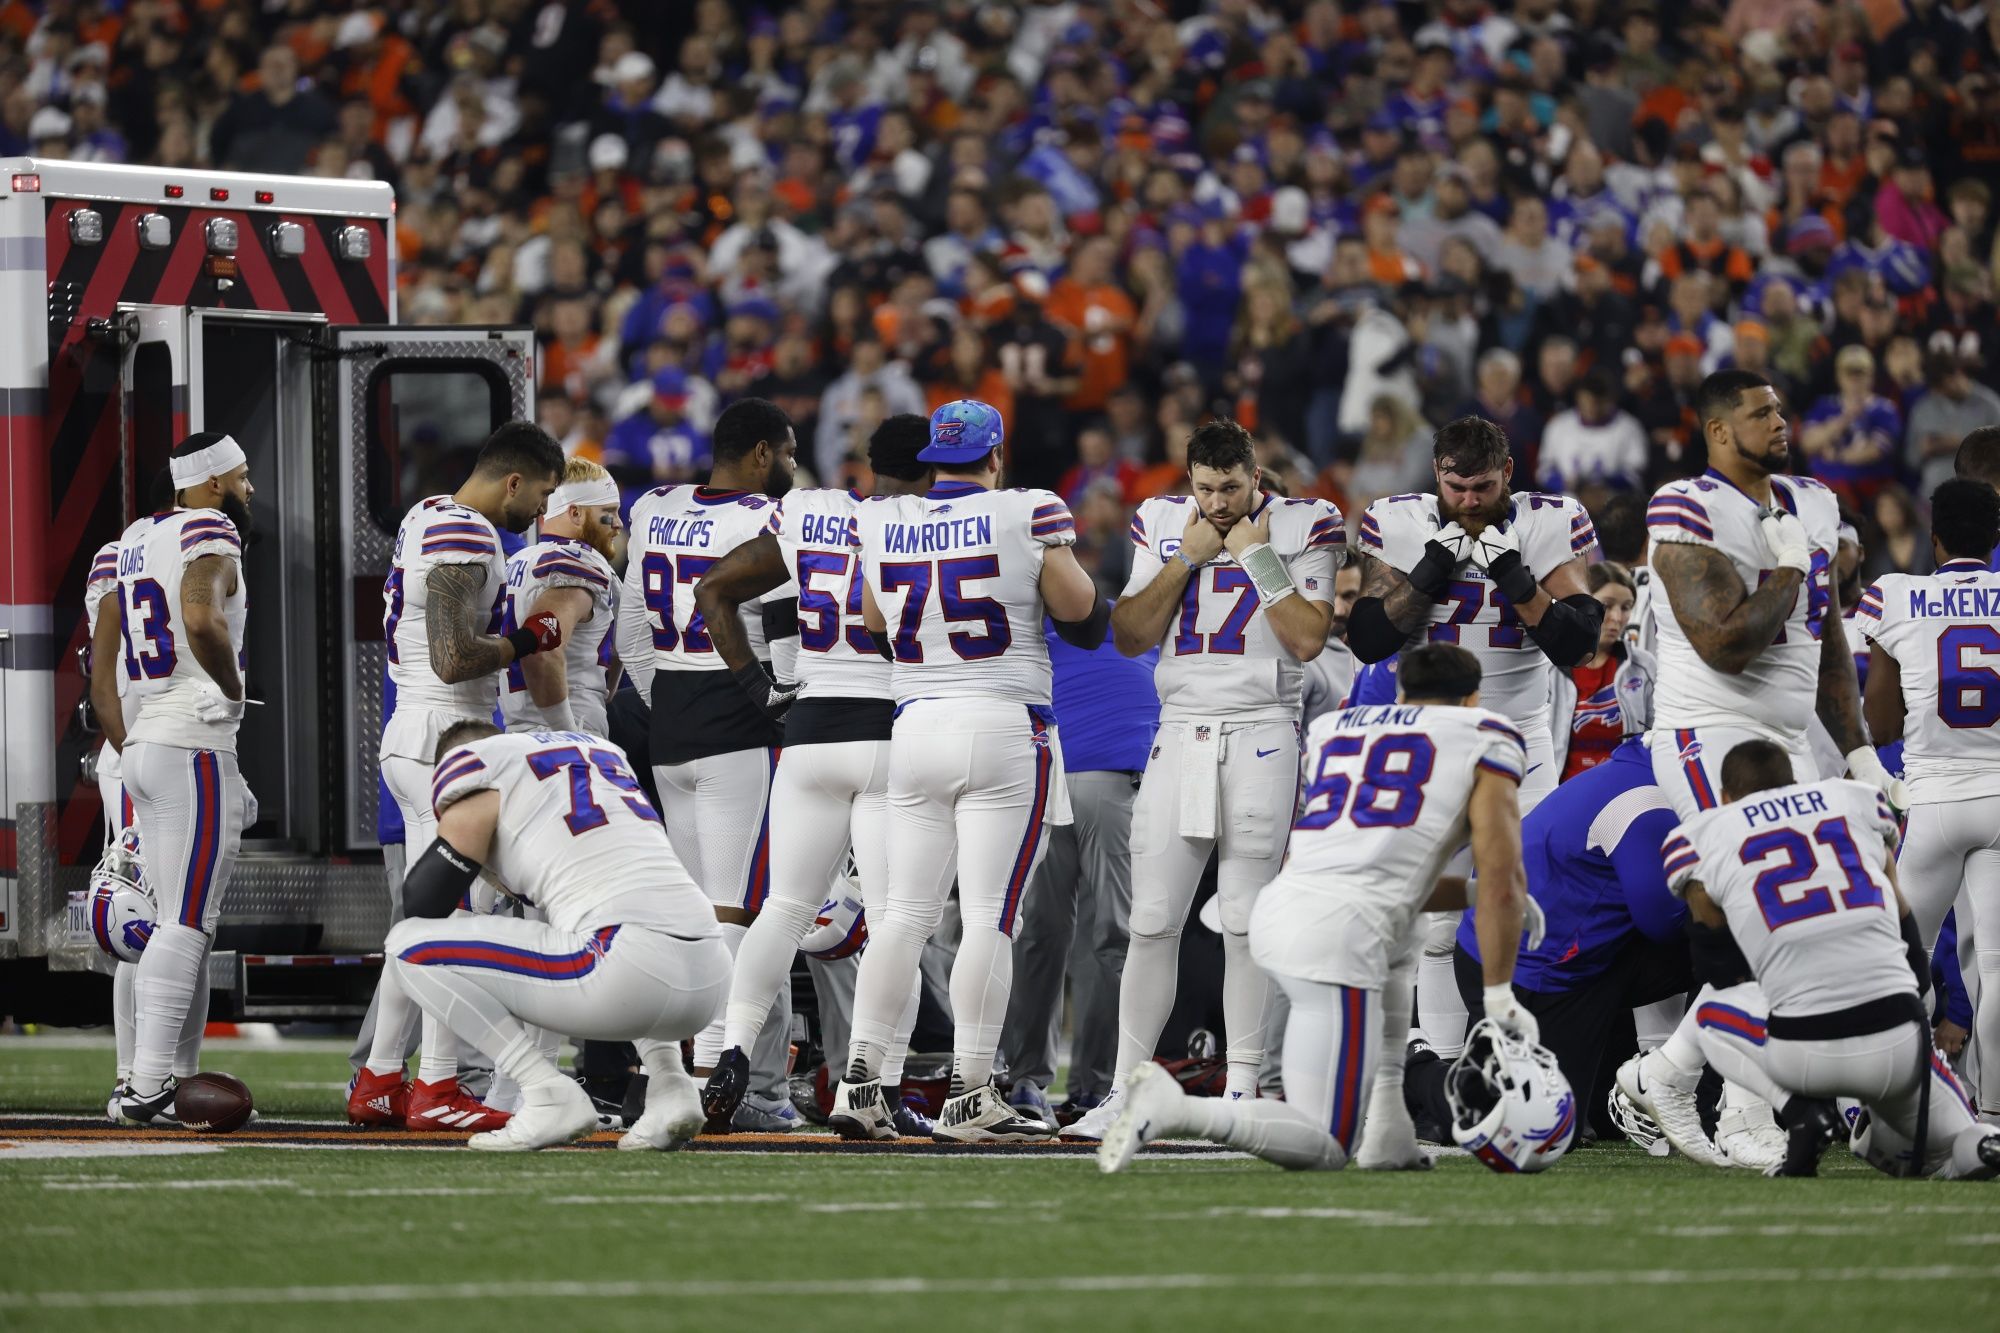 NFL Says Suspended Bills-Bengals game will not resume this week